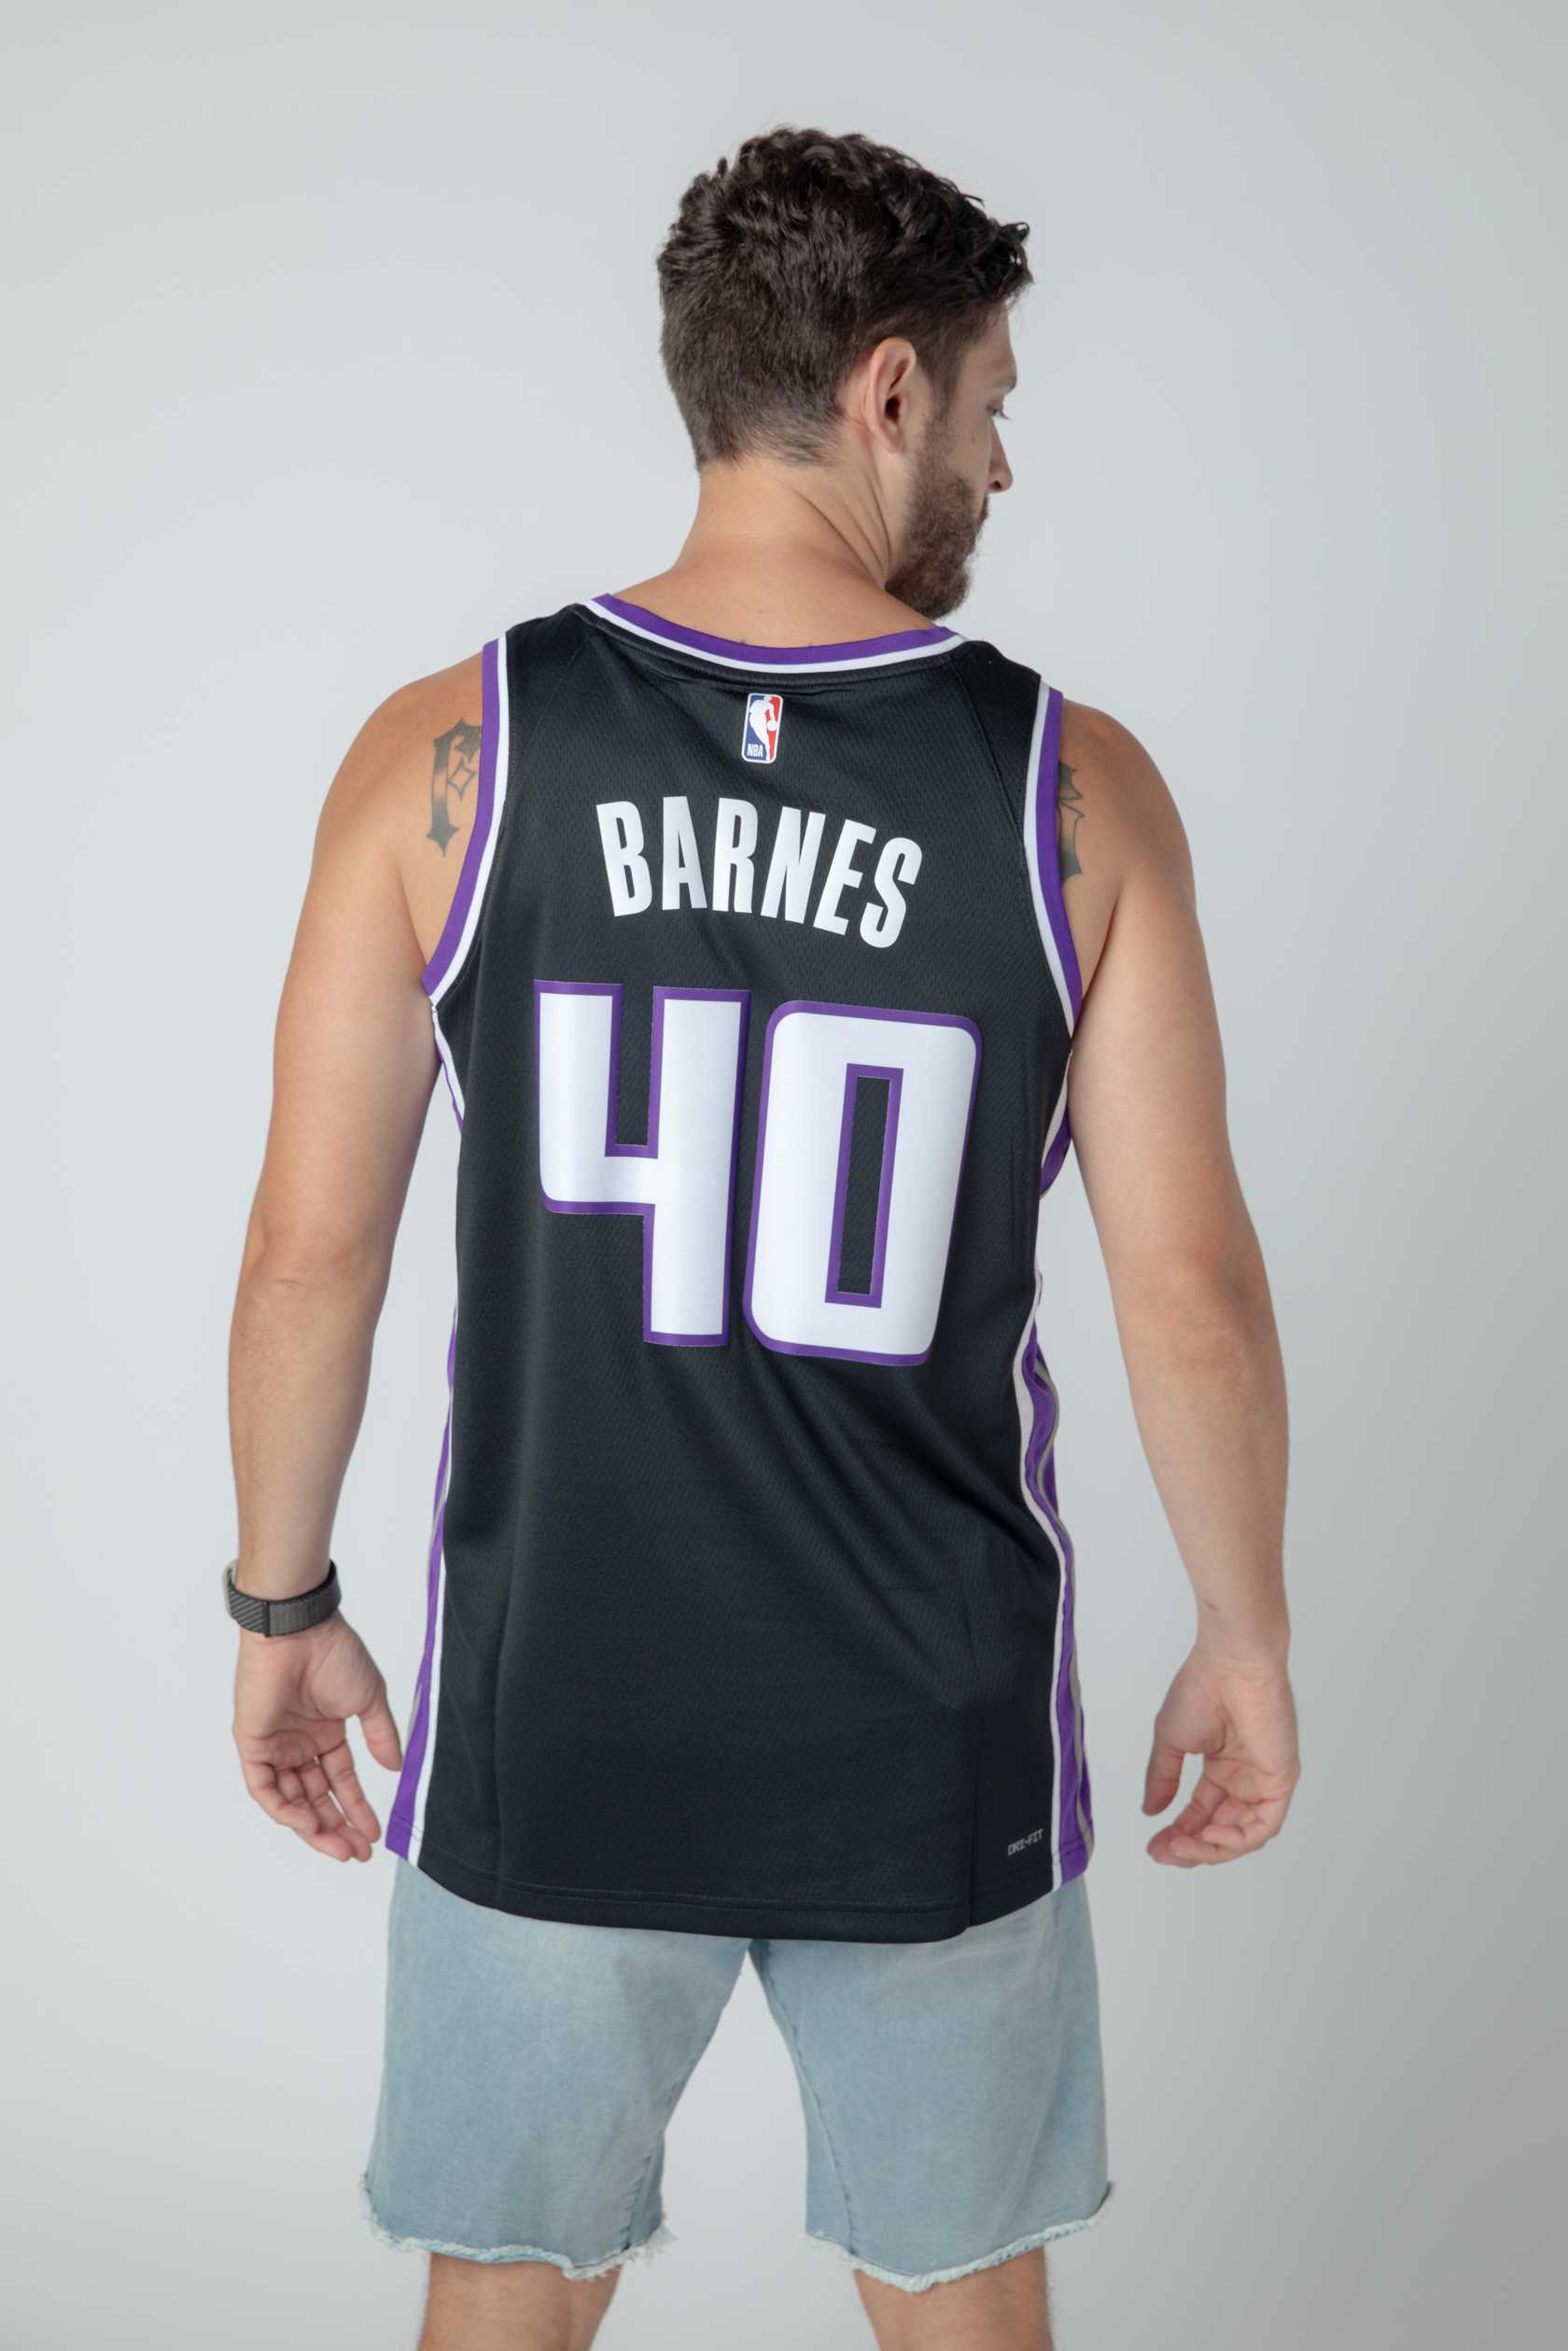 Basketball Jersey Fits: What NBA Jersey Size To Buy?